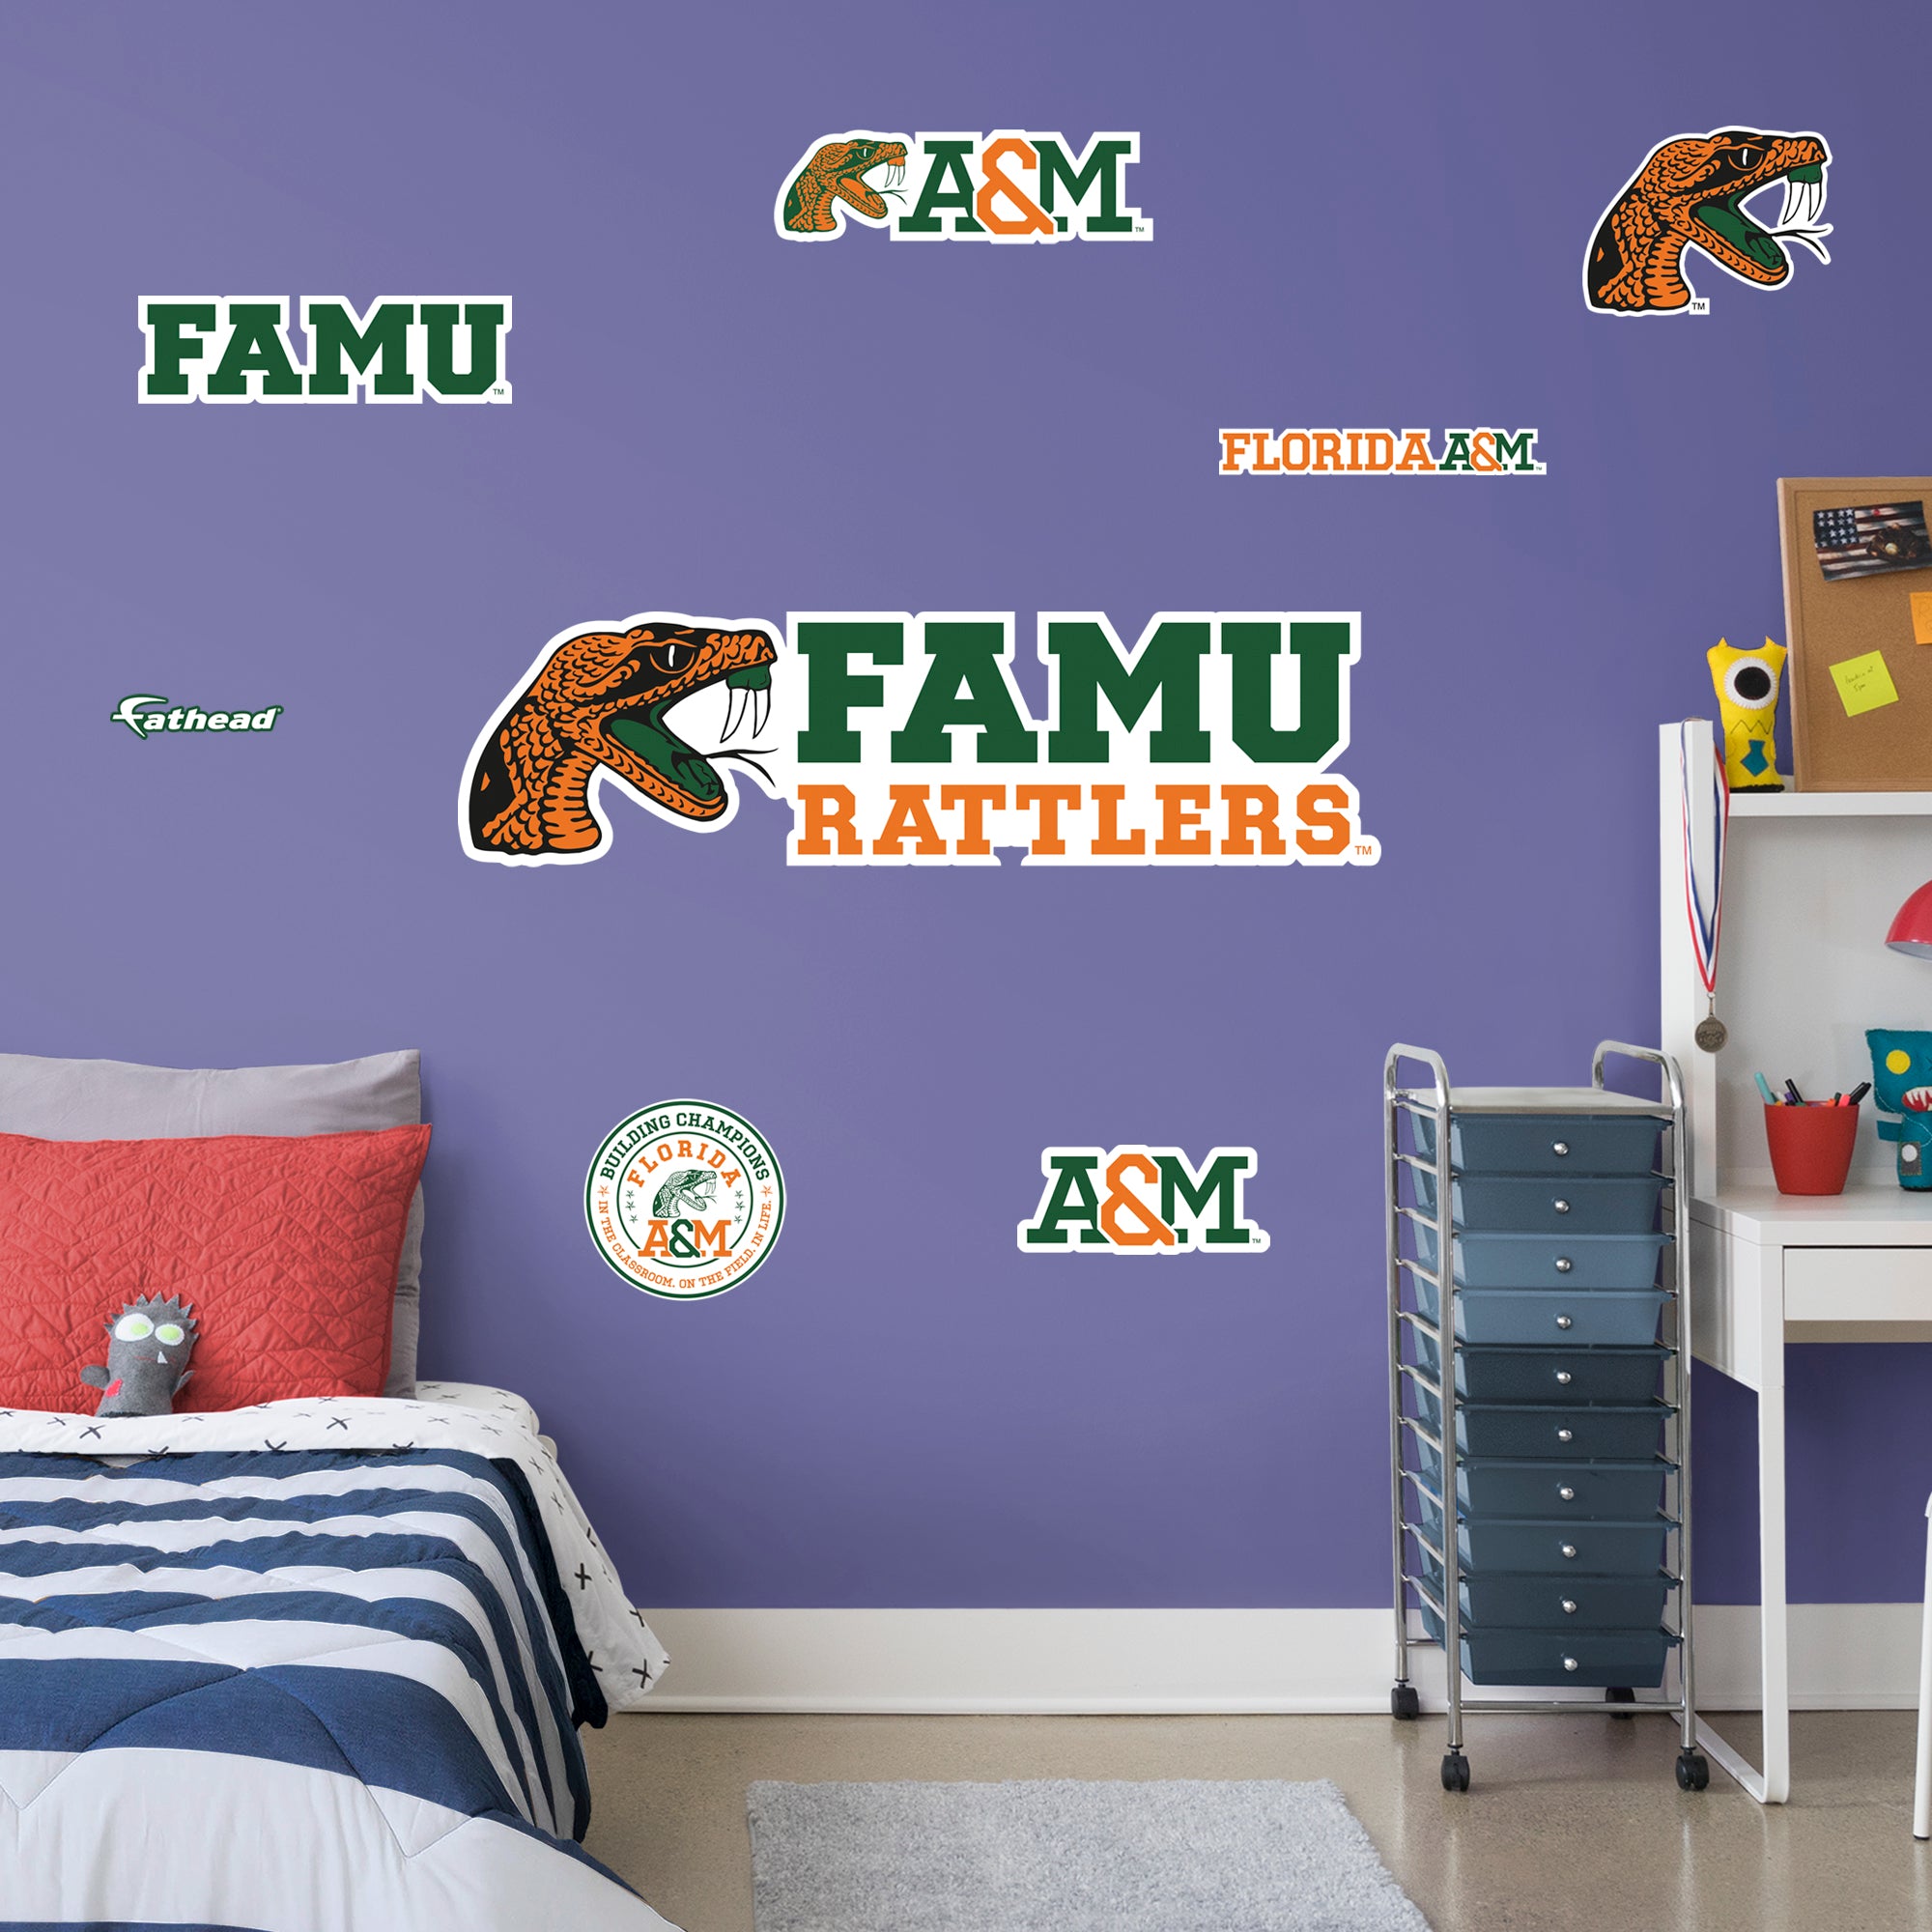 Florida A&M University 2020 RealBig - Officially Licensed NCAA Removable Wall Decal Giant Decal (14"W x 51"H) by Fathead | Vinyl